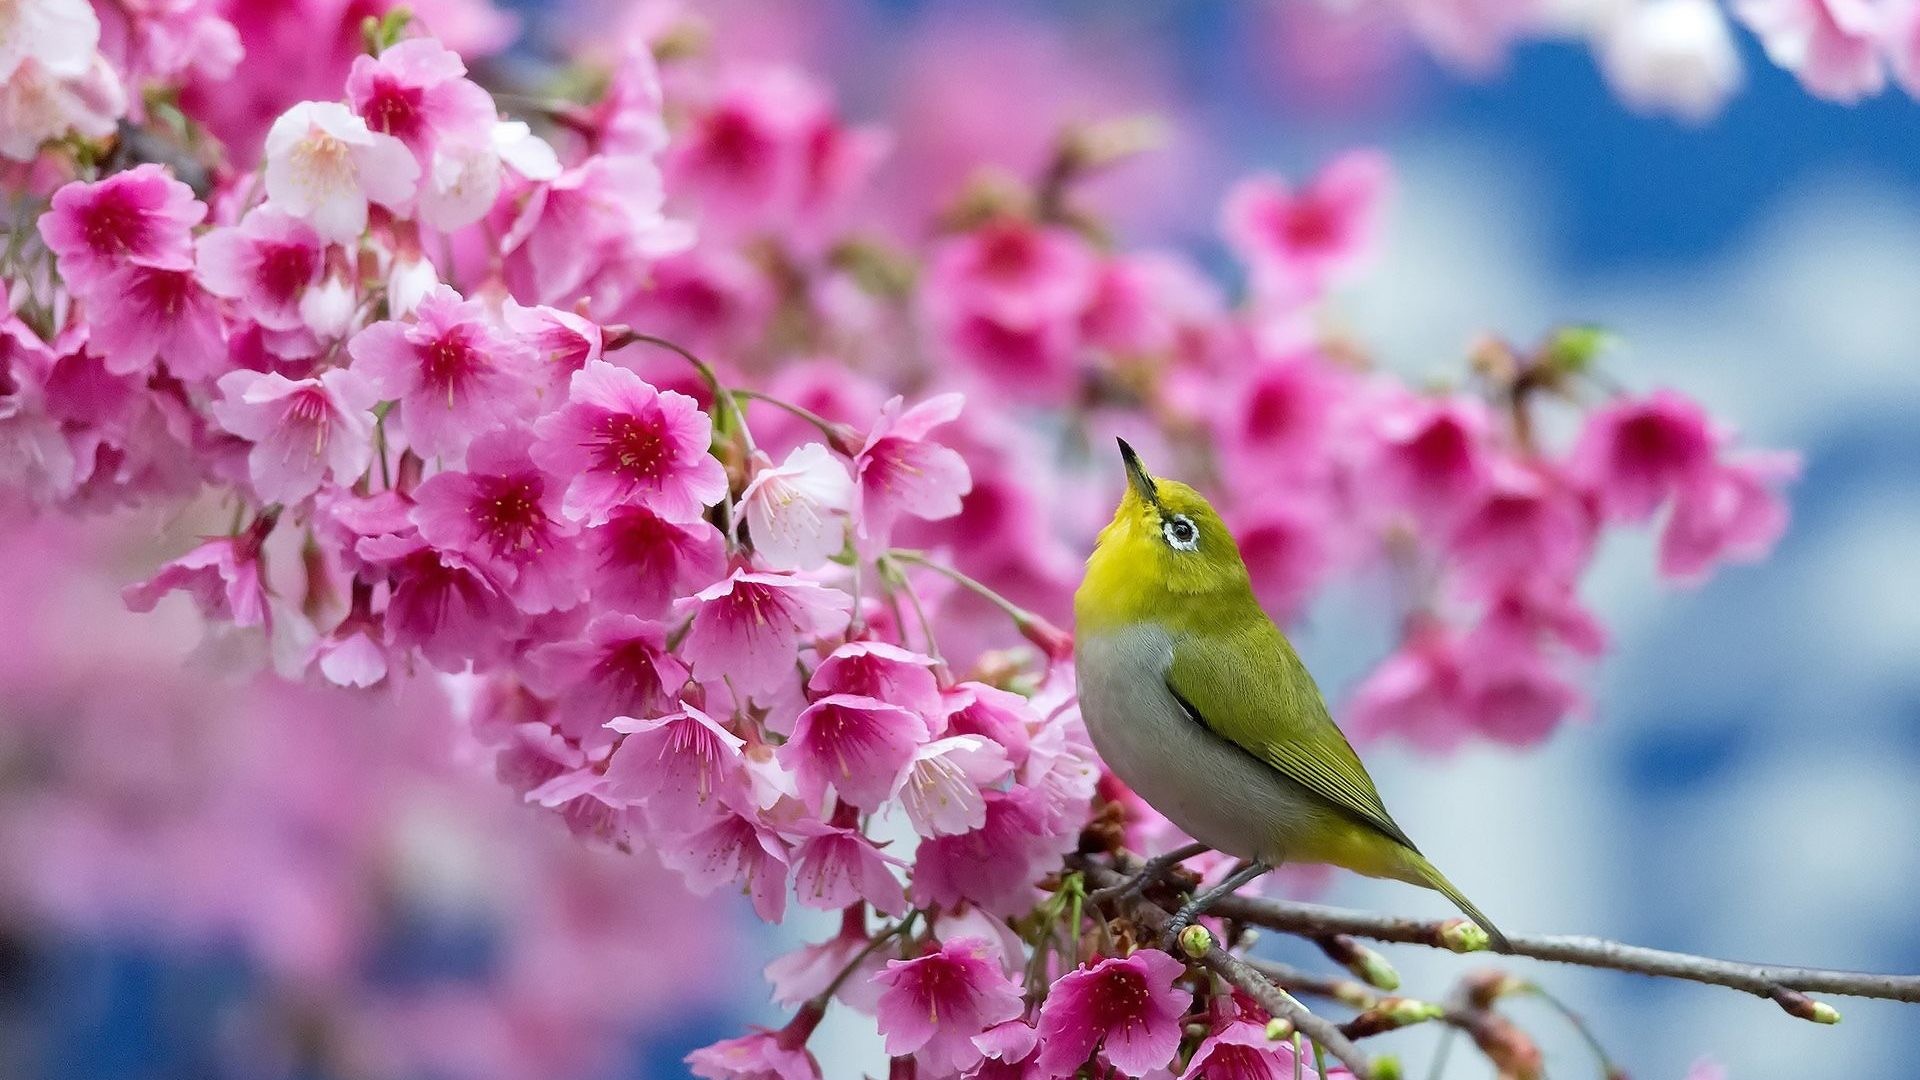 1920x1080 Bird Tag - Bird Flowers Flower Cherry Beauty Blossom Spring Branch Japanese  Wallpaper Photo Nature for